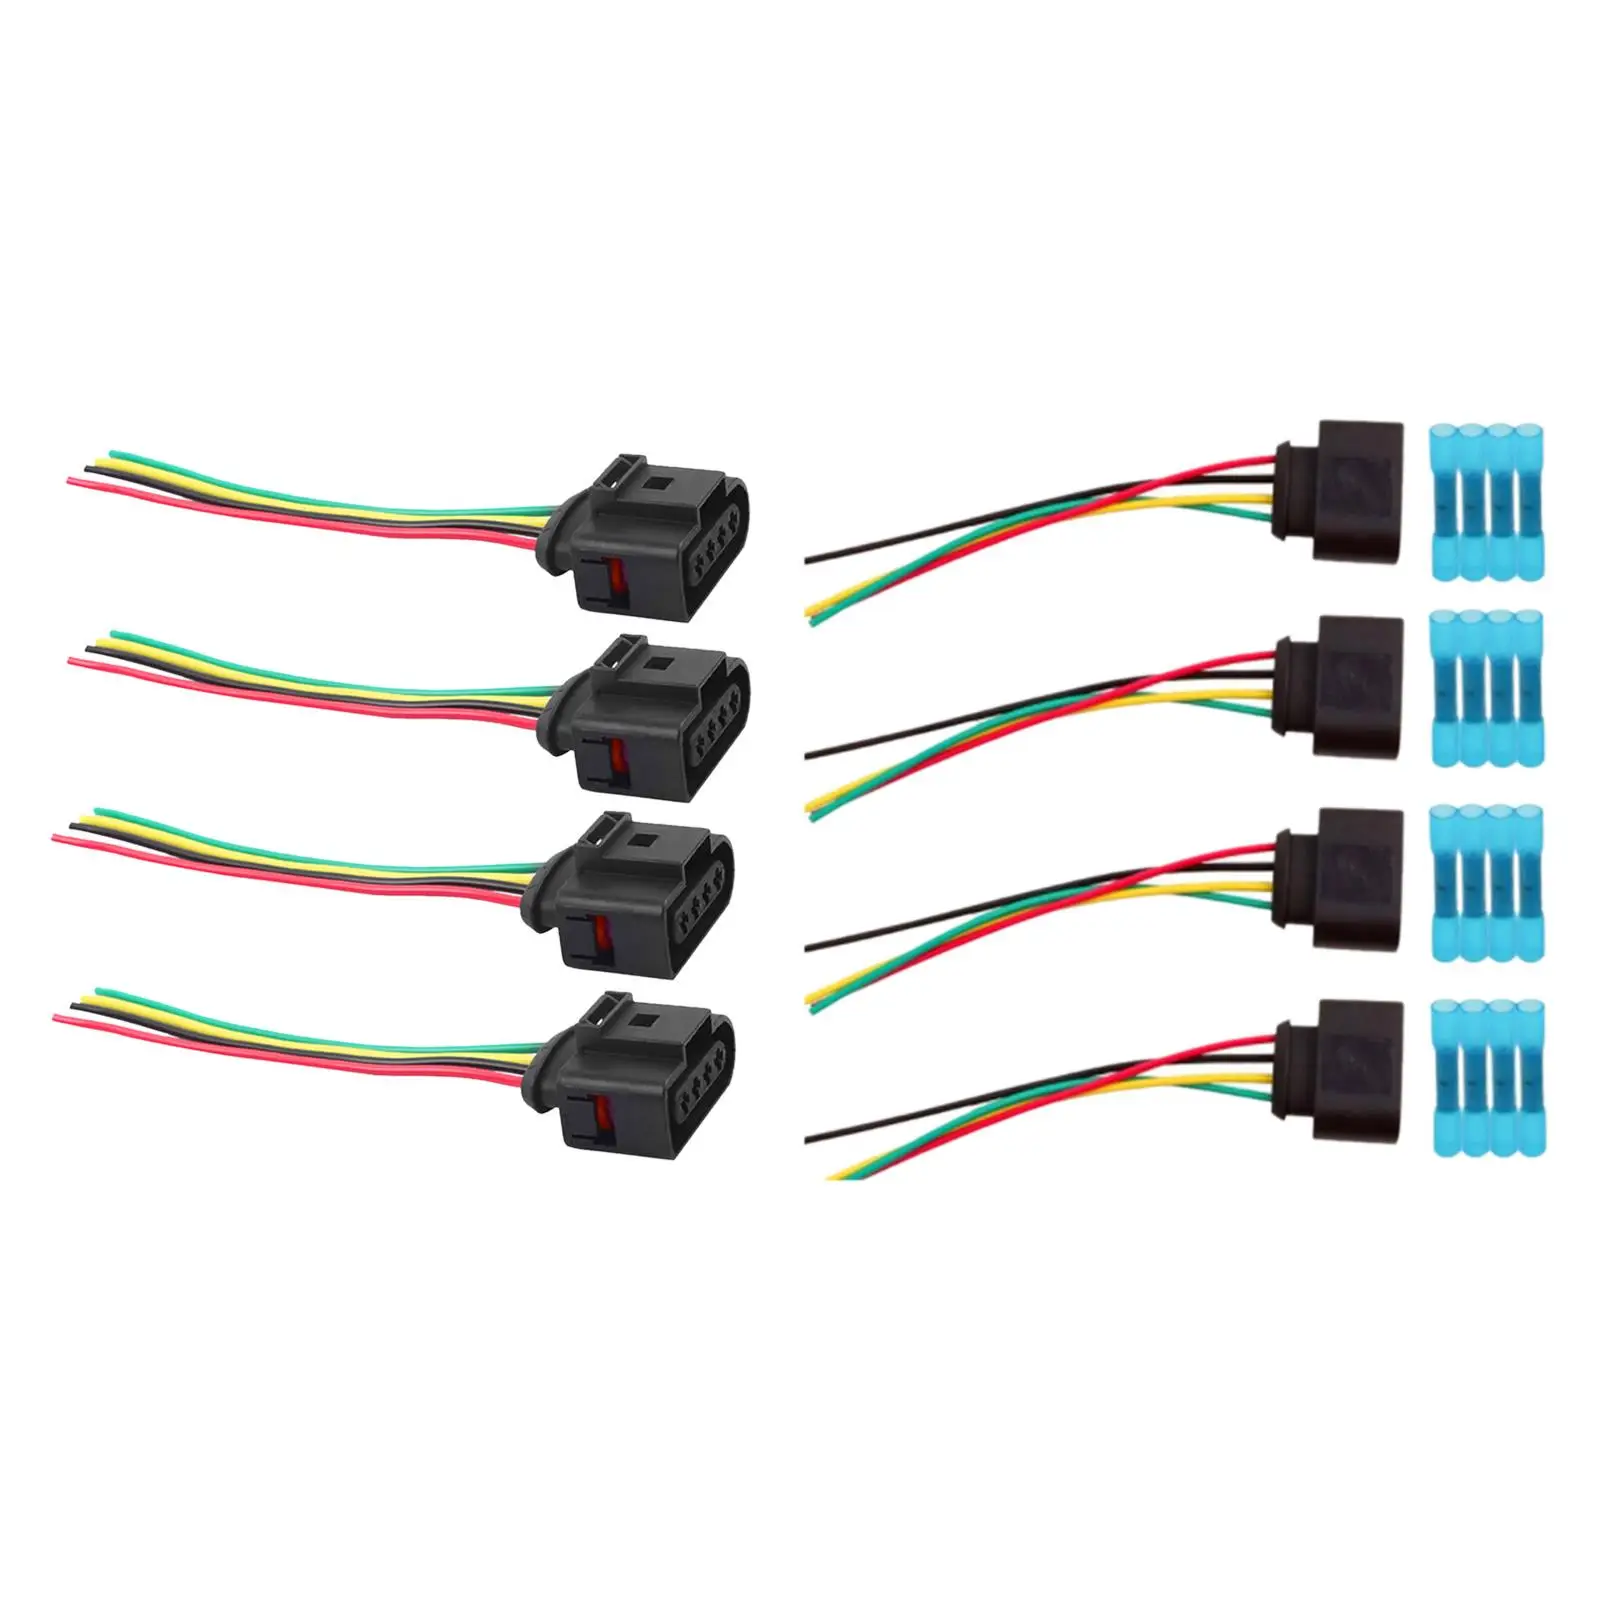 4x Ignition Connector, Plug Harness Portable Repair Kit Wiring Loom Durable for A8 A6 Replace Car Accessory Parts